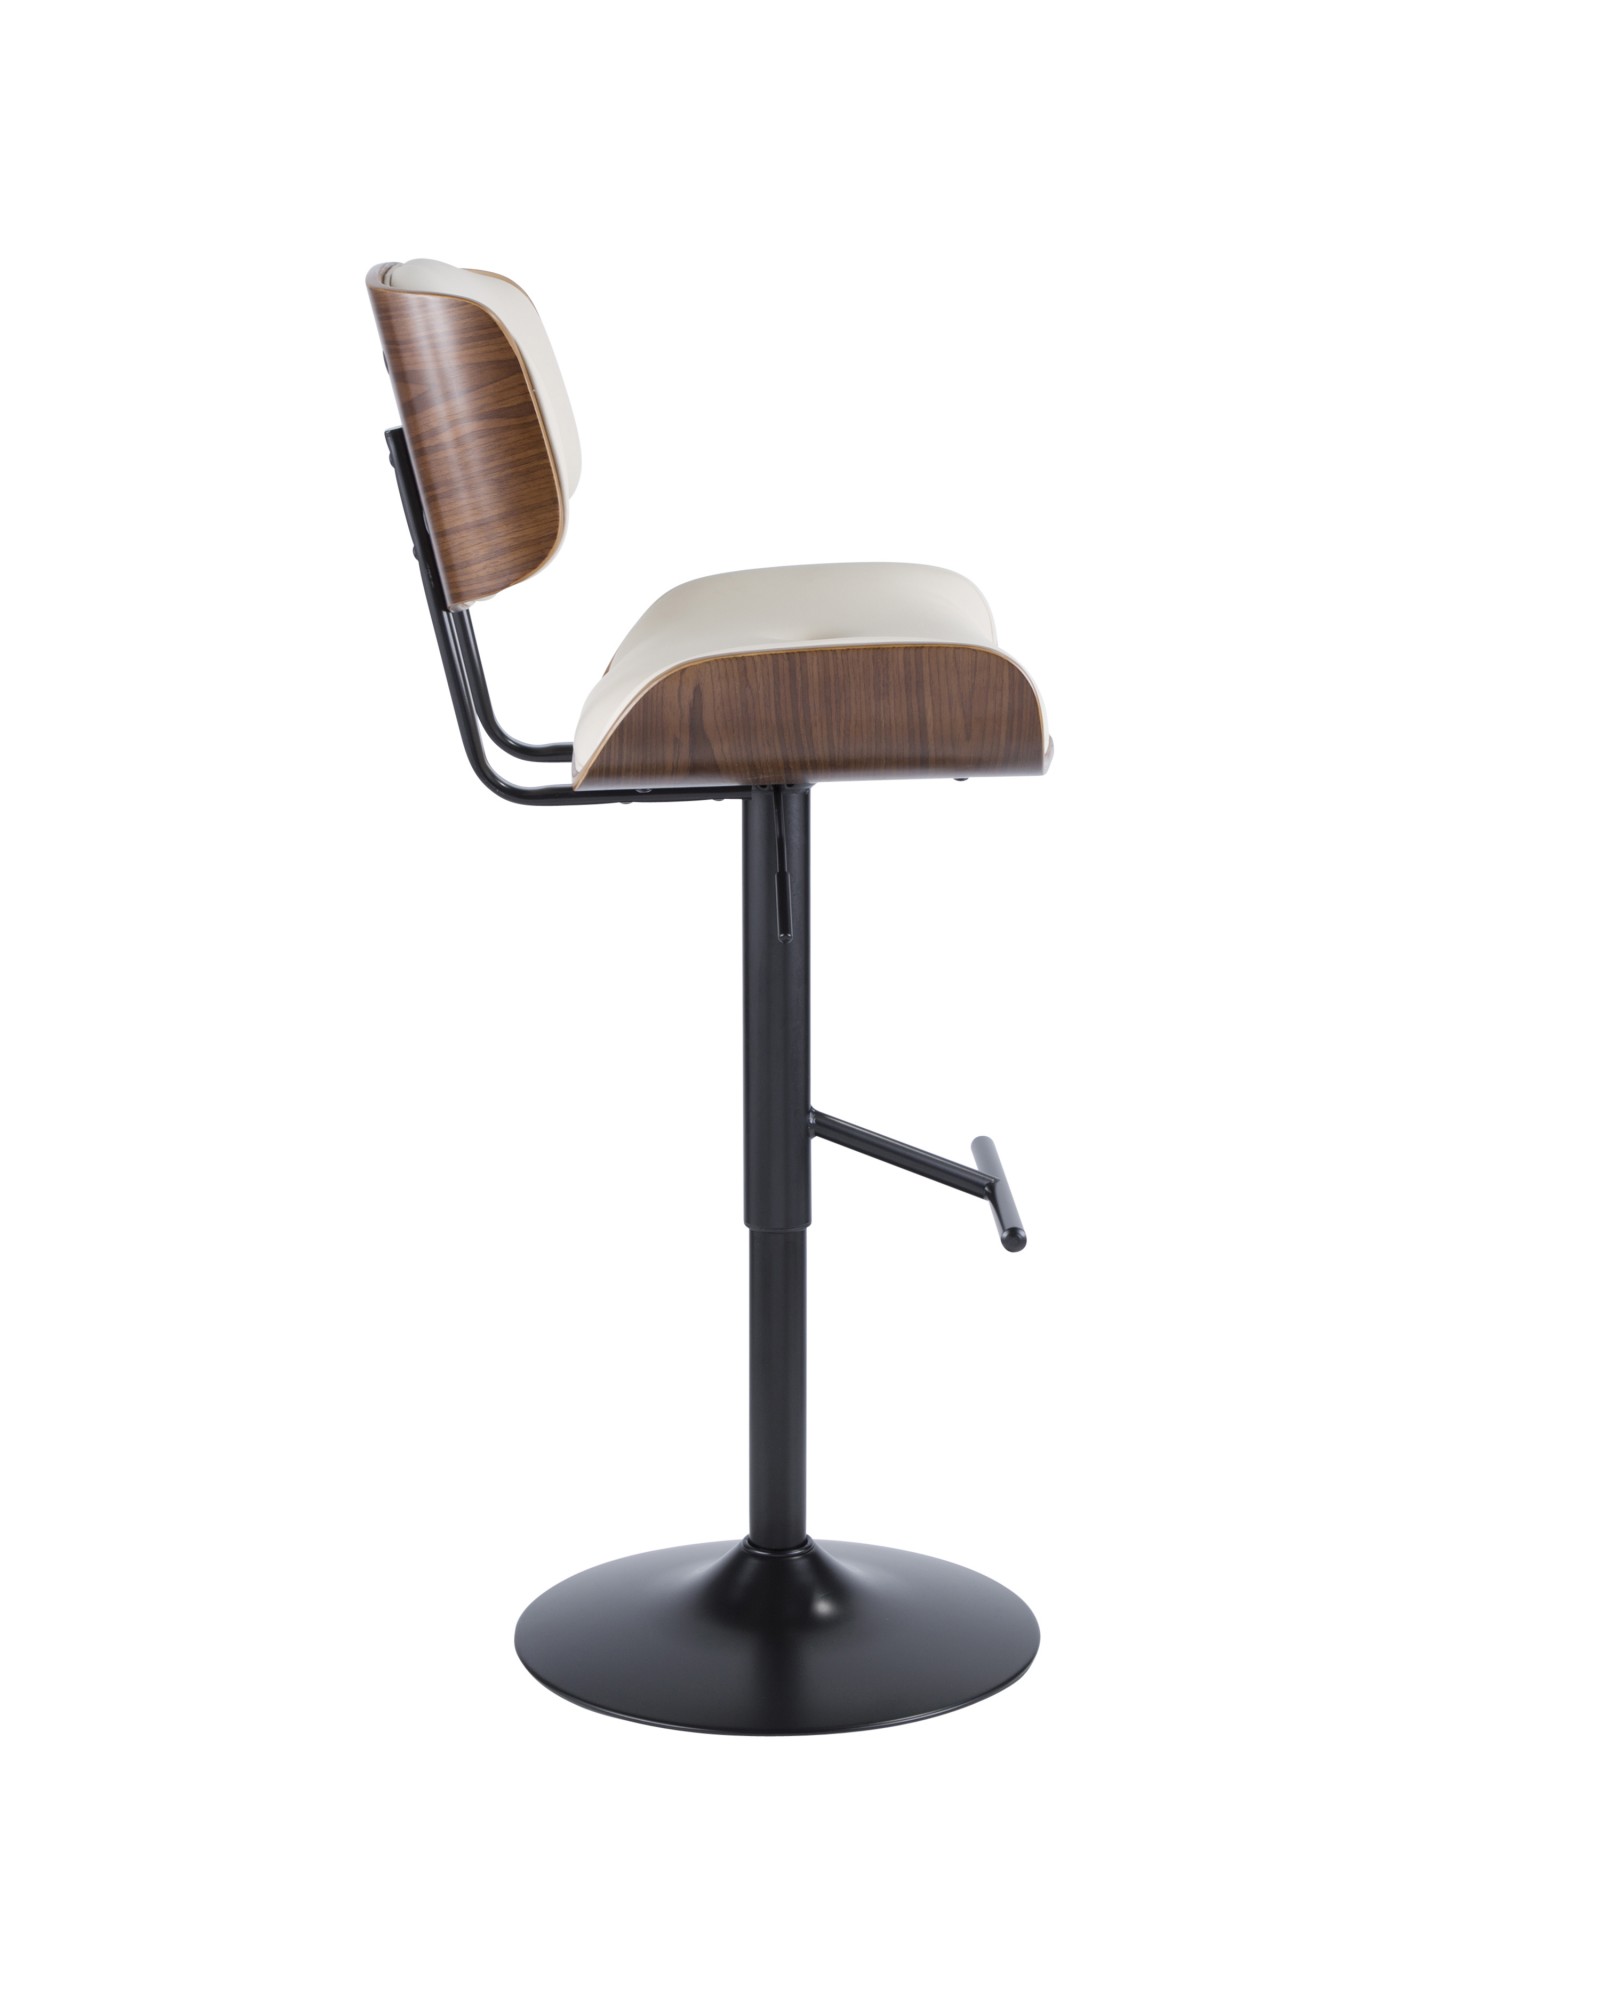 Lombardi Mid-Century Modern Adjustable Barstool in Walnut with Cream Faux Leather